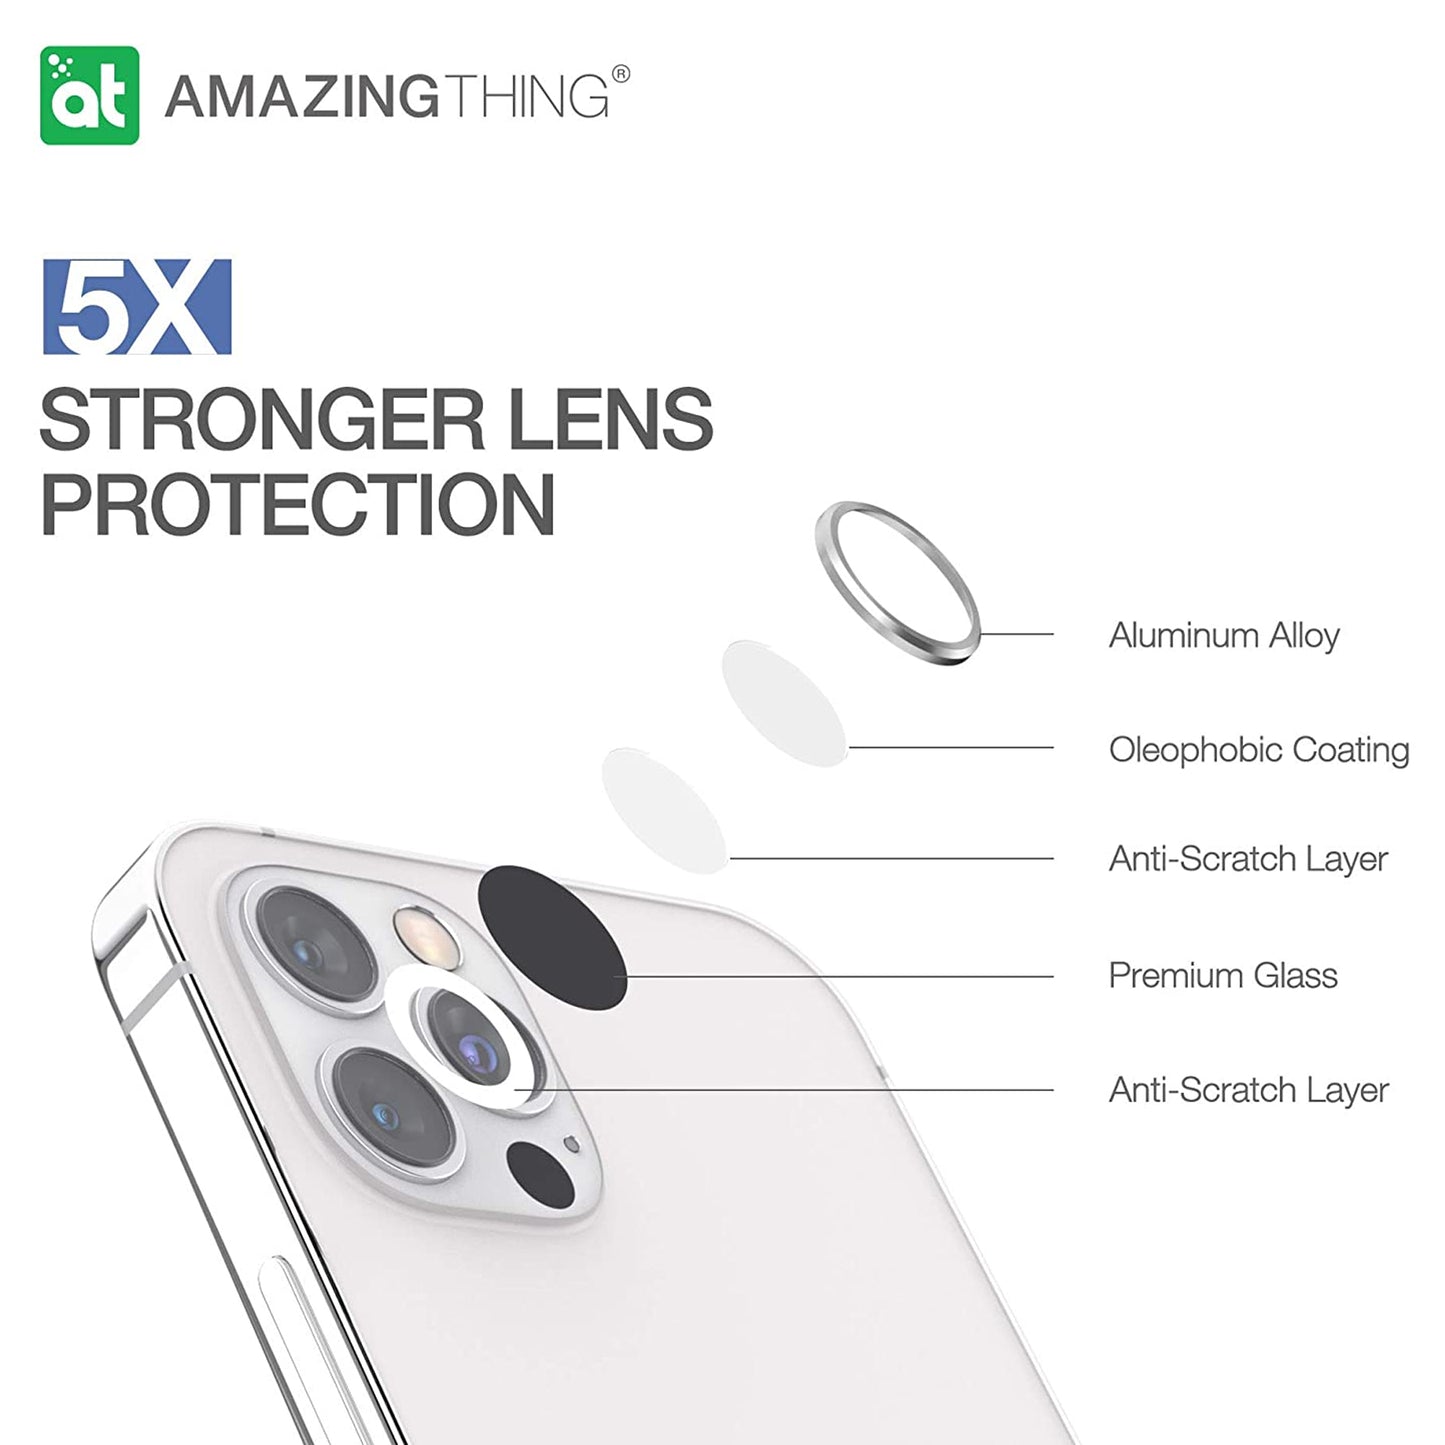 AMAZINGthing SUPREME AR 3D LensGlass Protector for iPhone 13 - 13 Mini 5G ( Two Lens ) - Blue (Barcode: 4892878069465 )